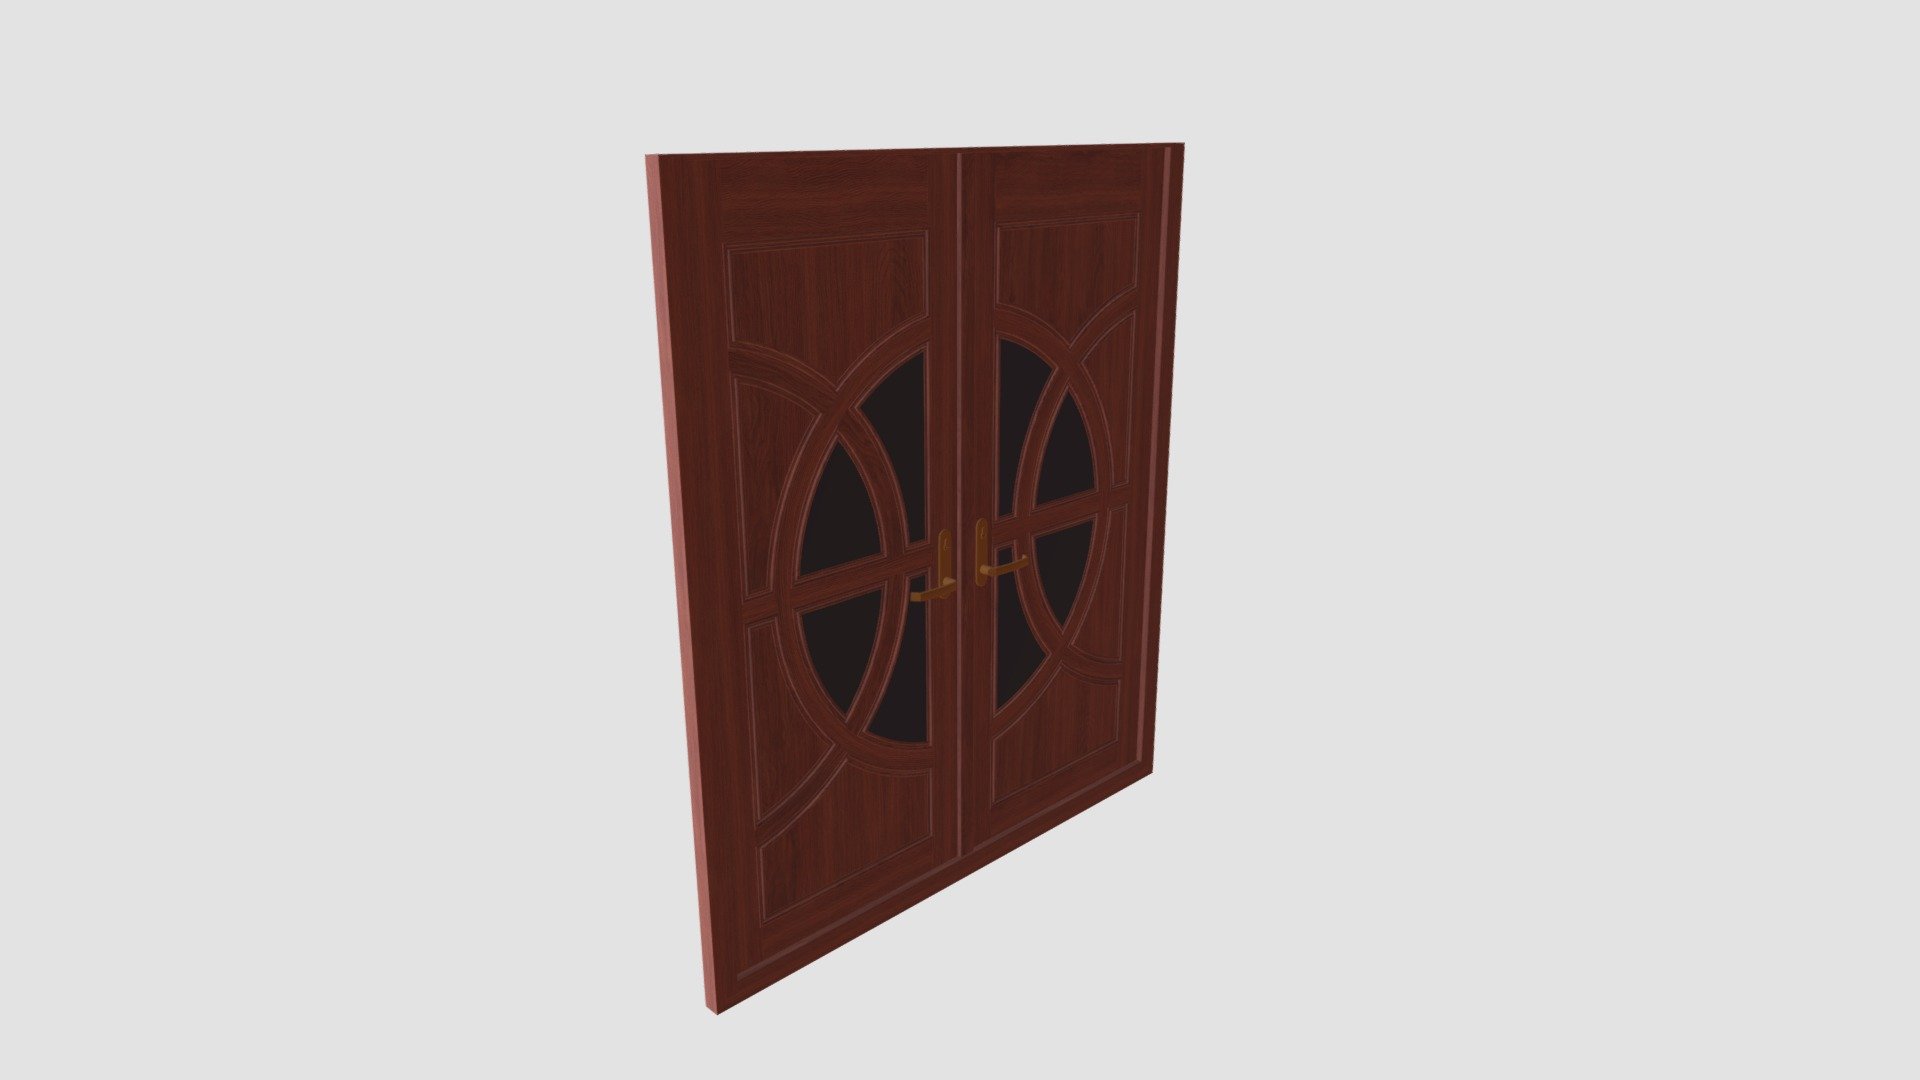 Highly detailed model of door with textures, shaders and materials. It is ready to use, just put it into your scene 3d model